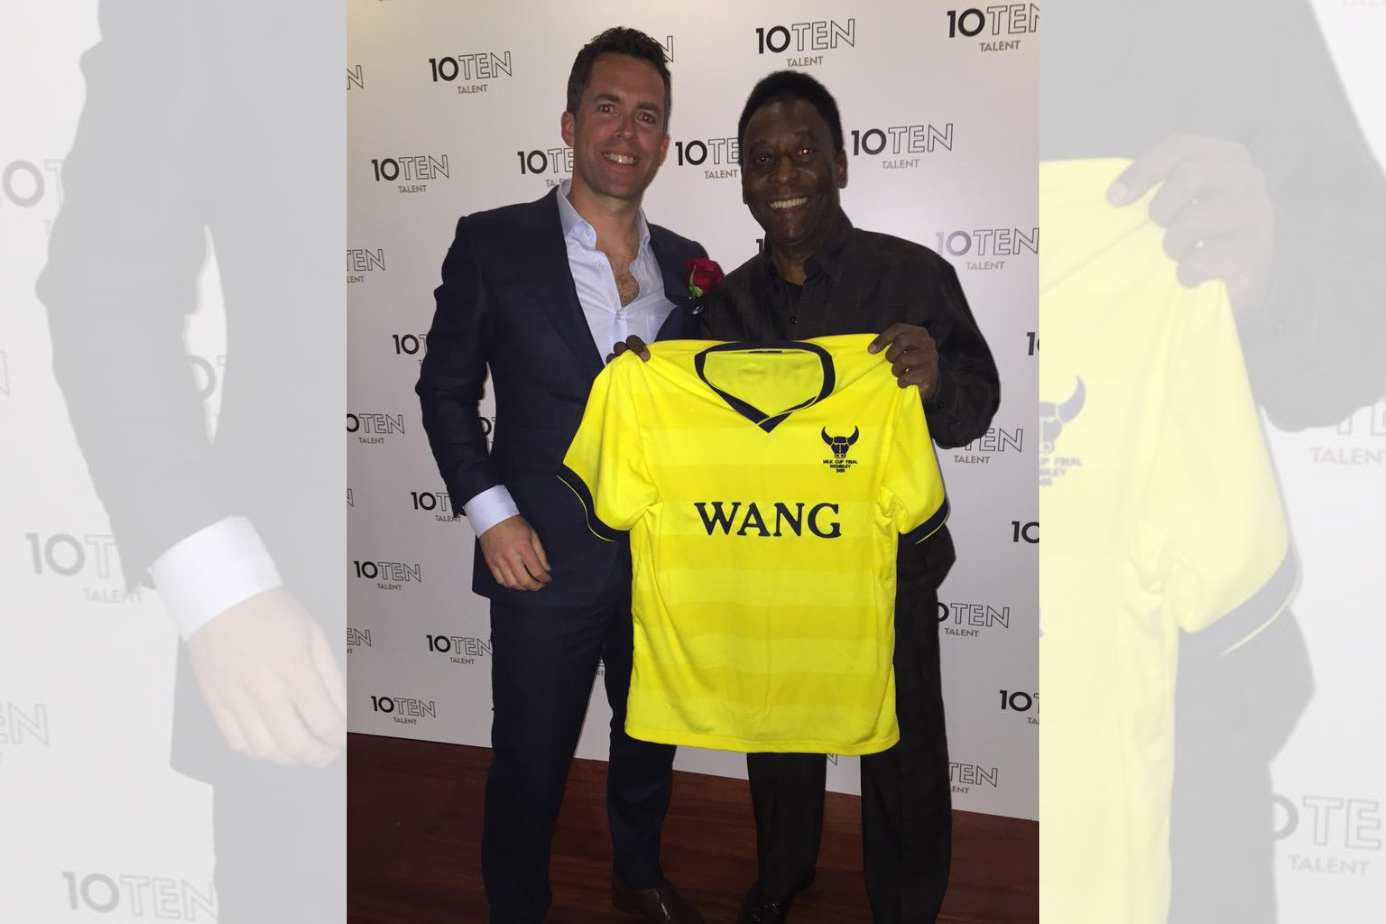 Oxford United shirt held by Brazil World Cup legend Pele